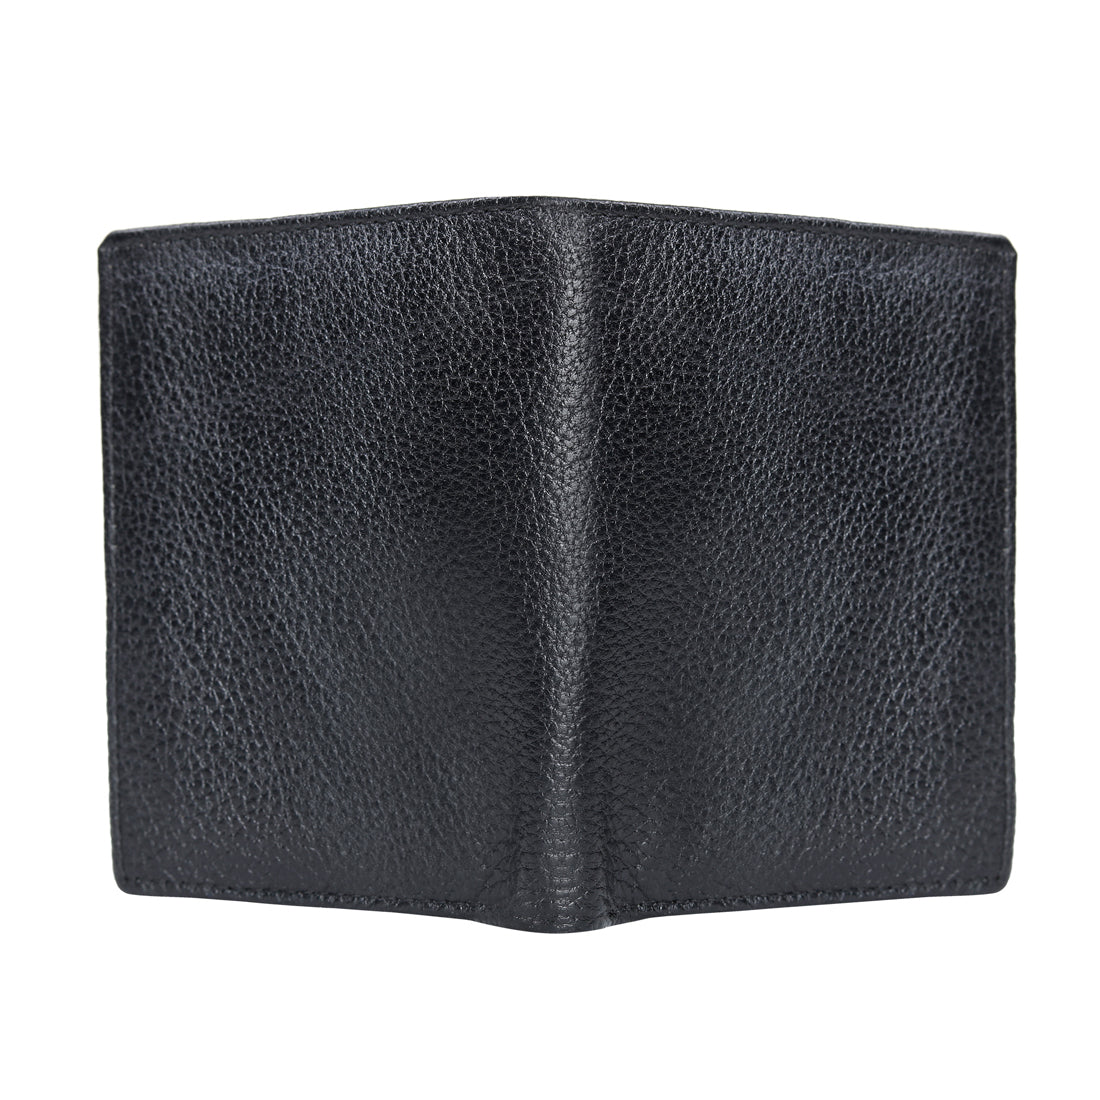 Genuine Gritty Leather Casual Wallet For Men